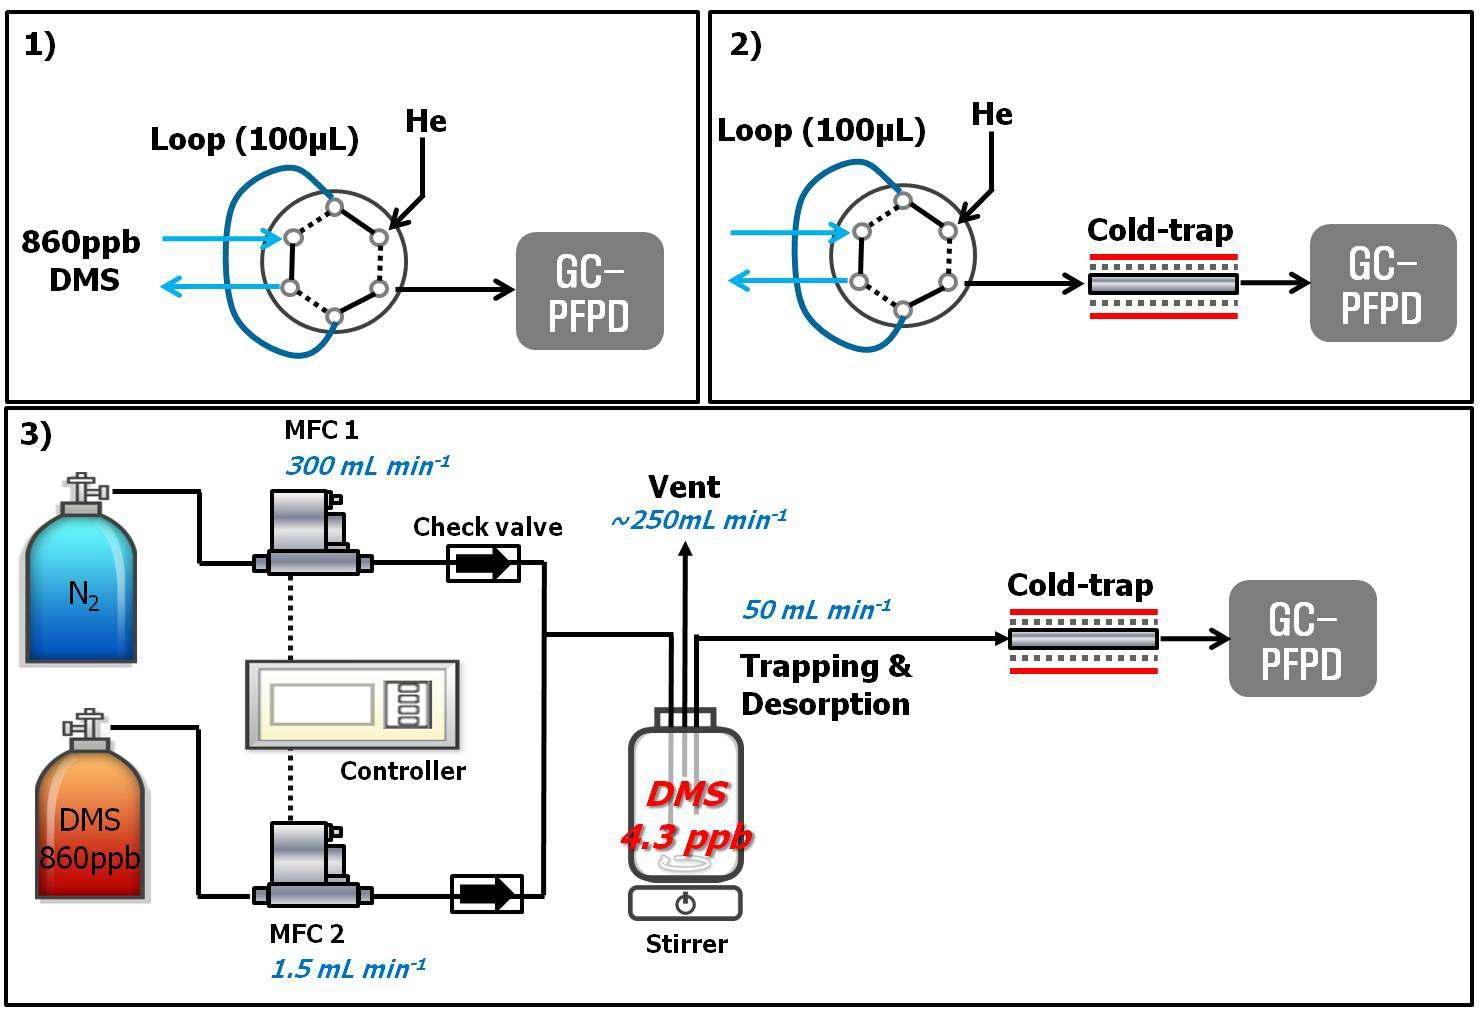 1) loop injection method without coldtrap, 2) loop injection method with coldtrap, 3) continuous standard gas dilution method